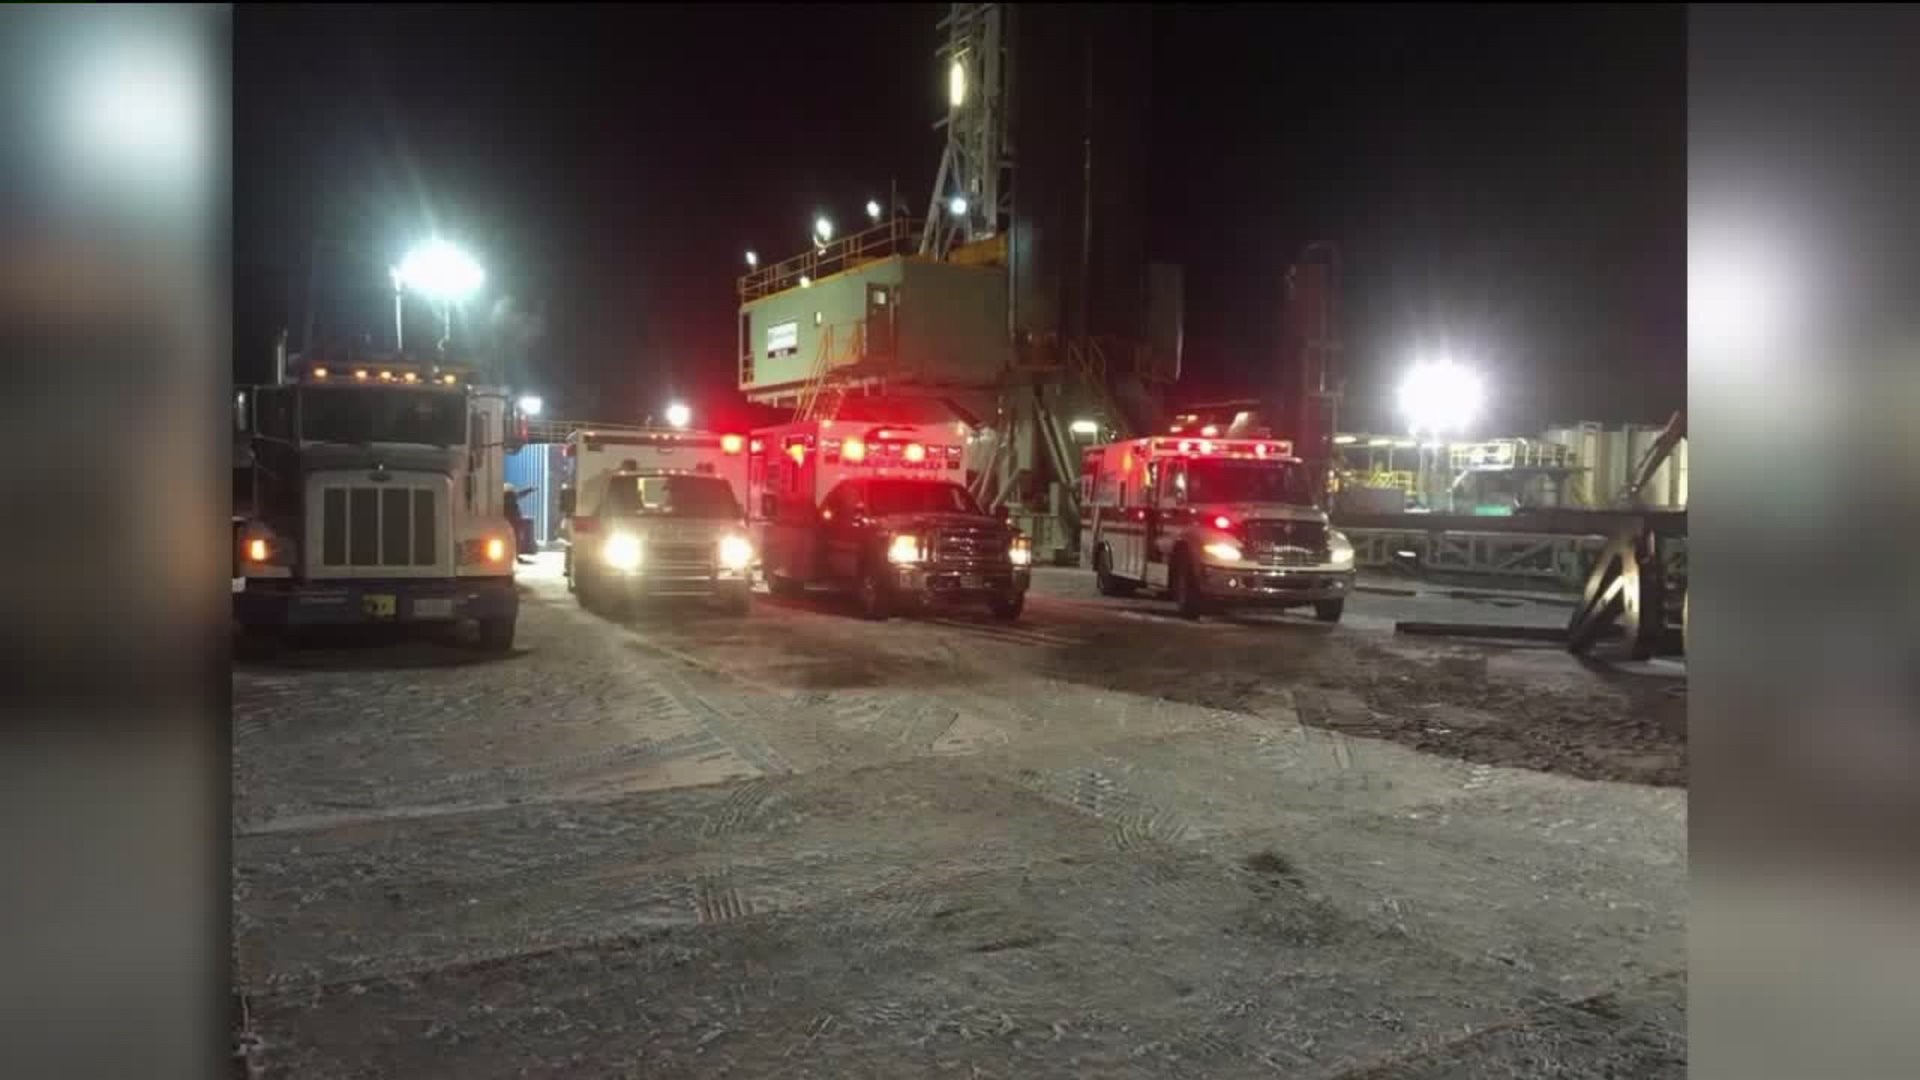 Workers Hurt at Natural Gas Well Pad in Susquehanna County